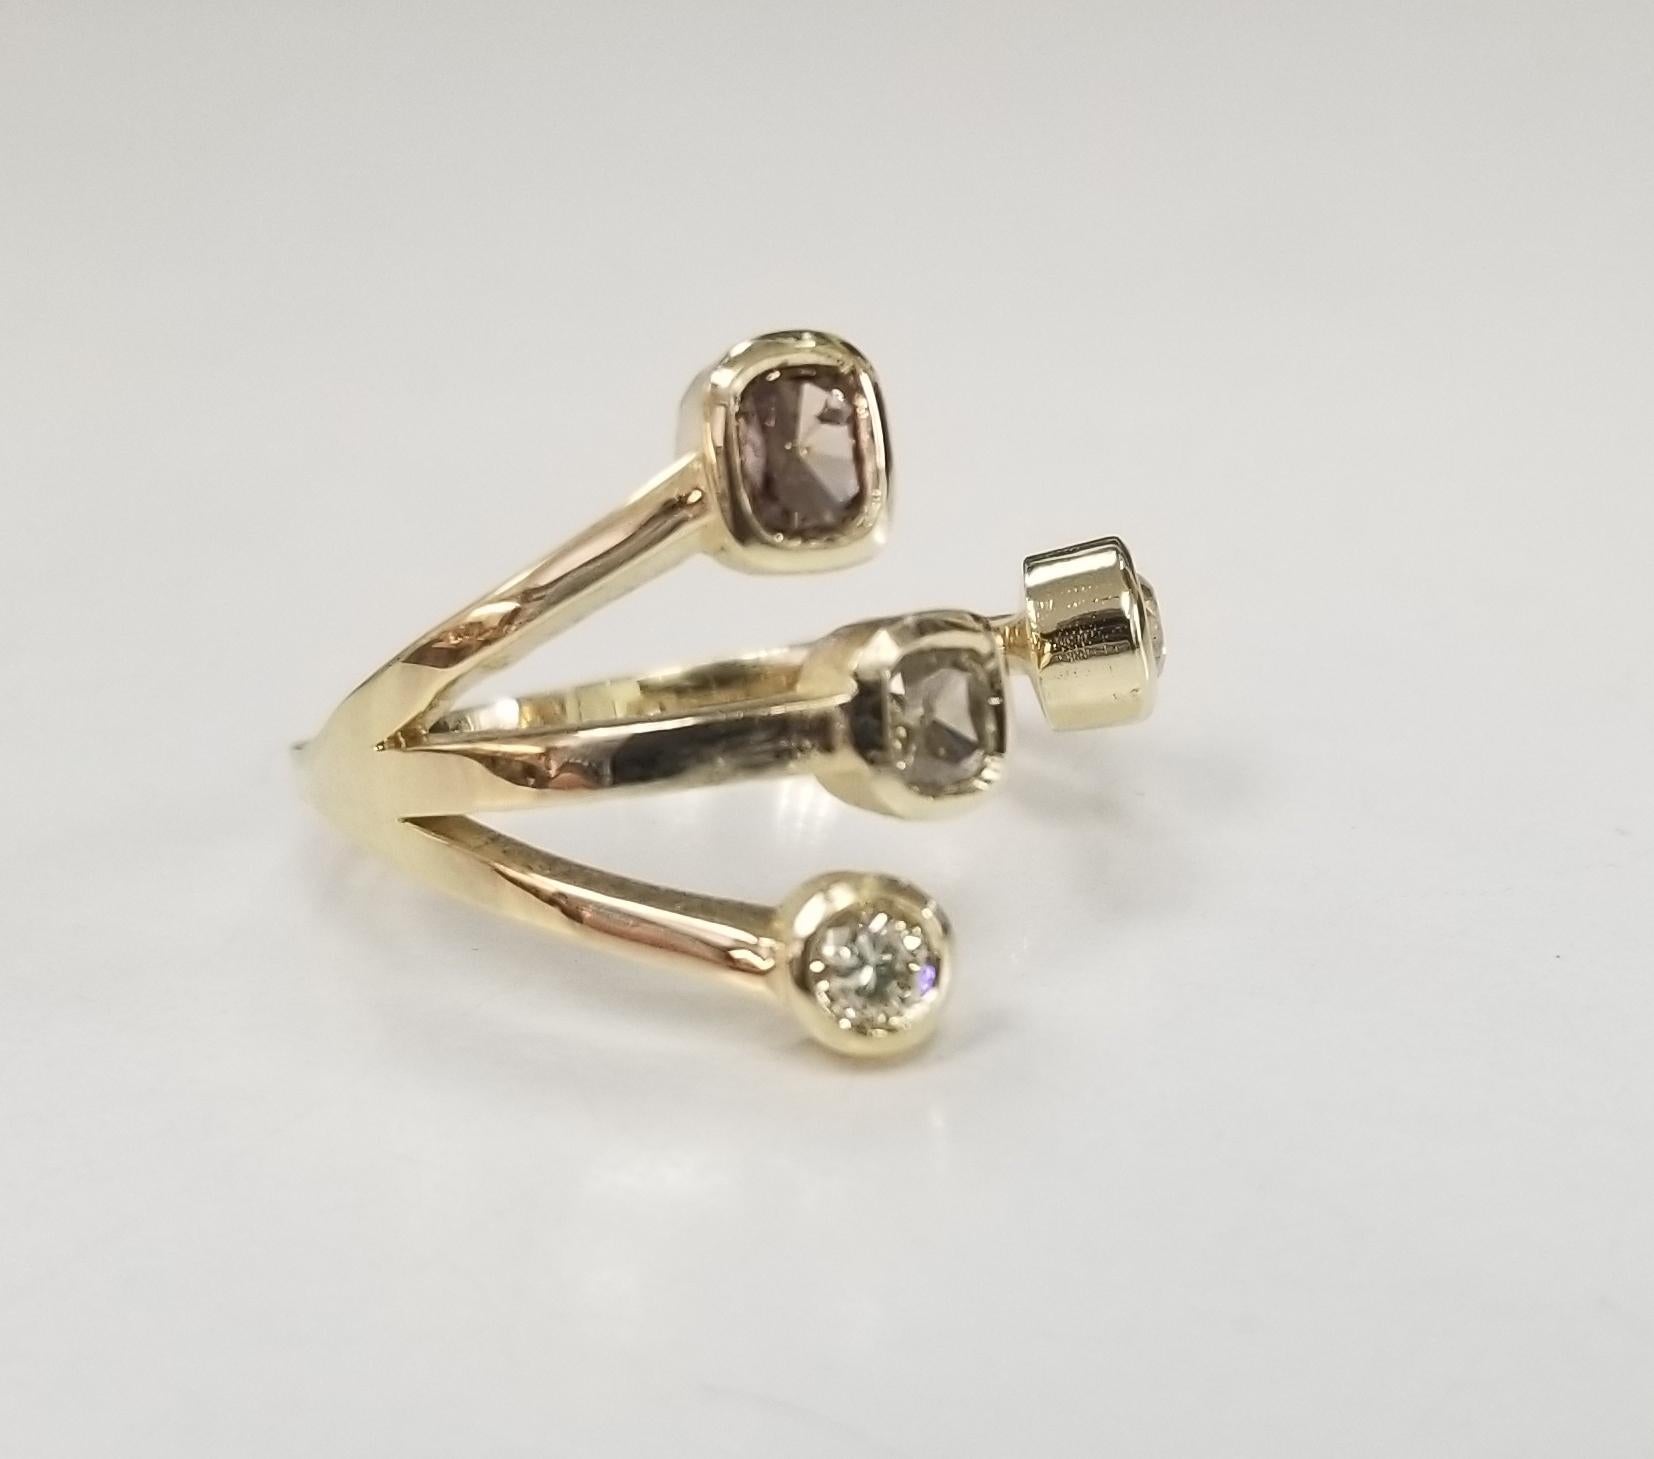 14K yellow gold White and Brown Diamonds split ring
Specifications:
    MAIN stone:   4 White and Brown Diamonds .59pts,    
    metal: 14K YELLOW GOLD
    type: RING
    weight: 4 GRS 
    size: 6.75 US
*Pick your stones and shape*